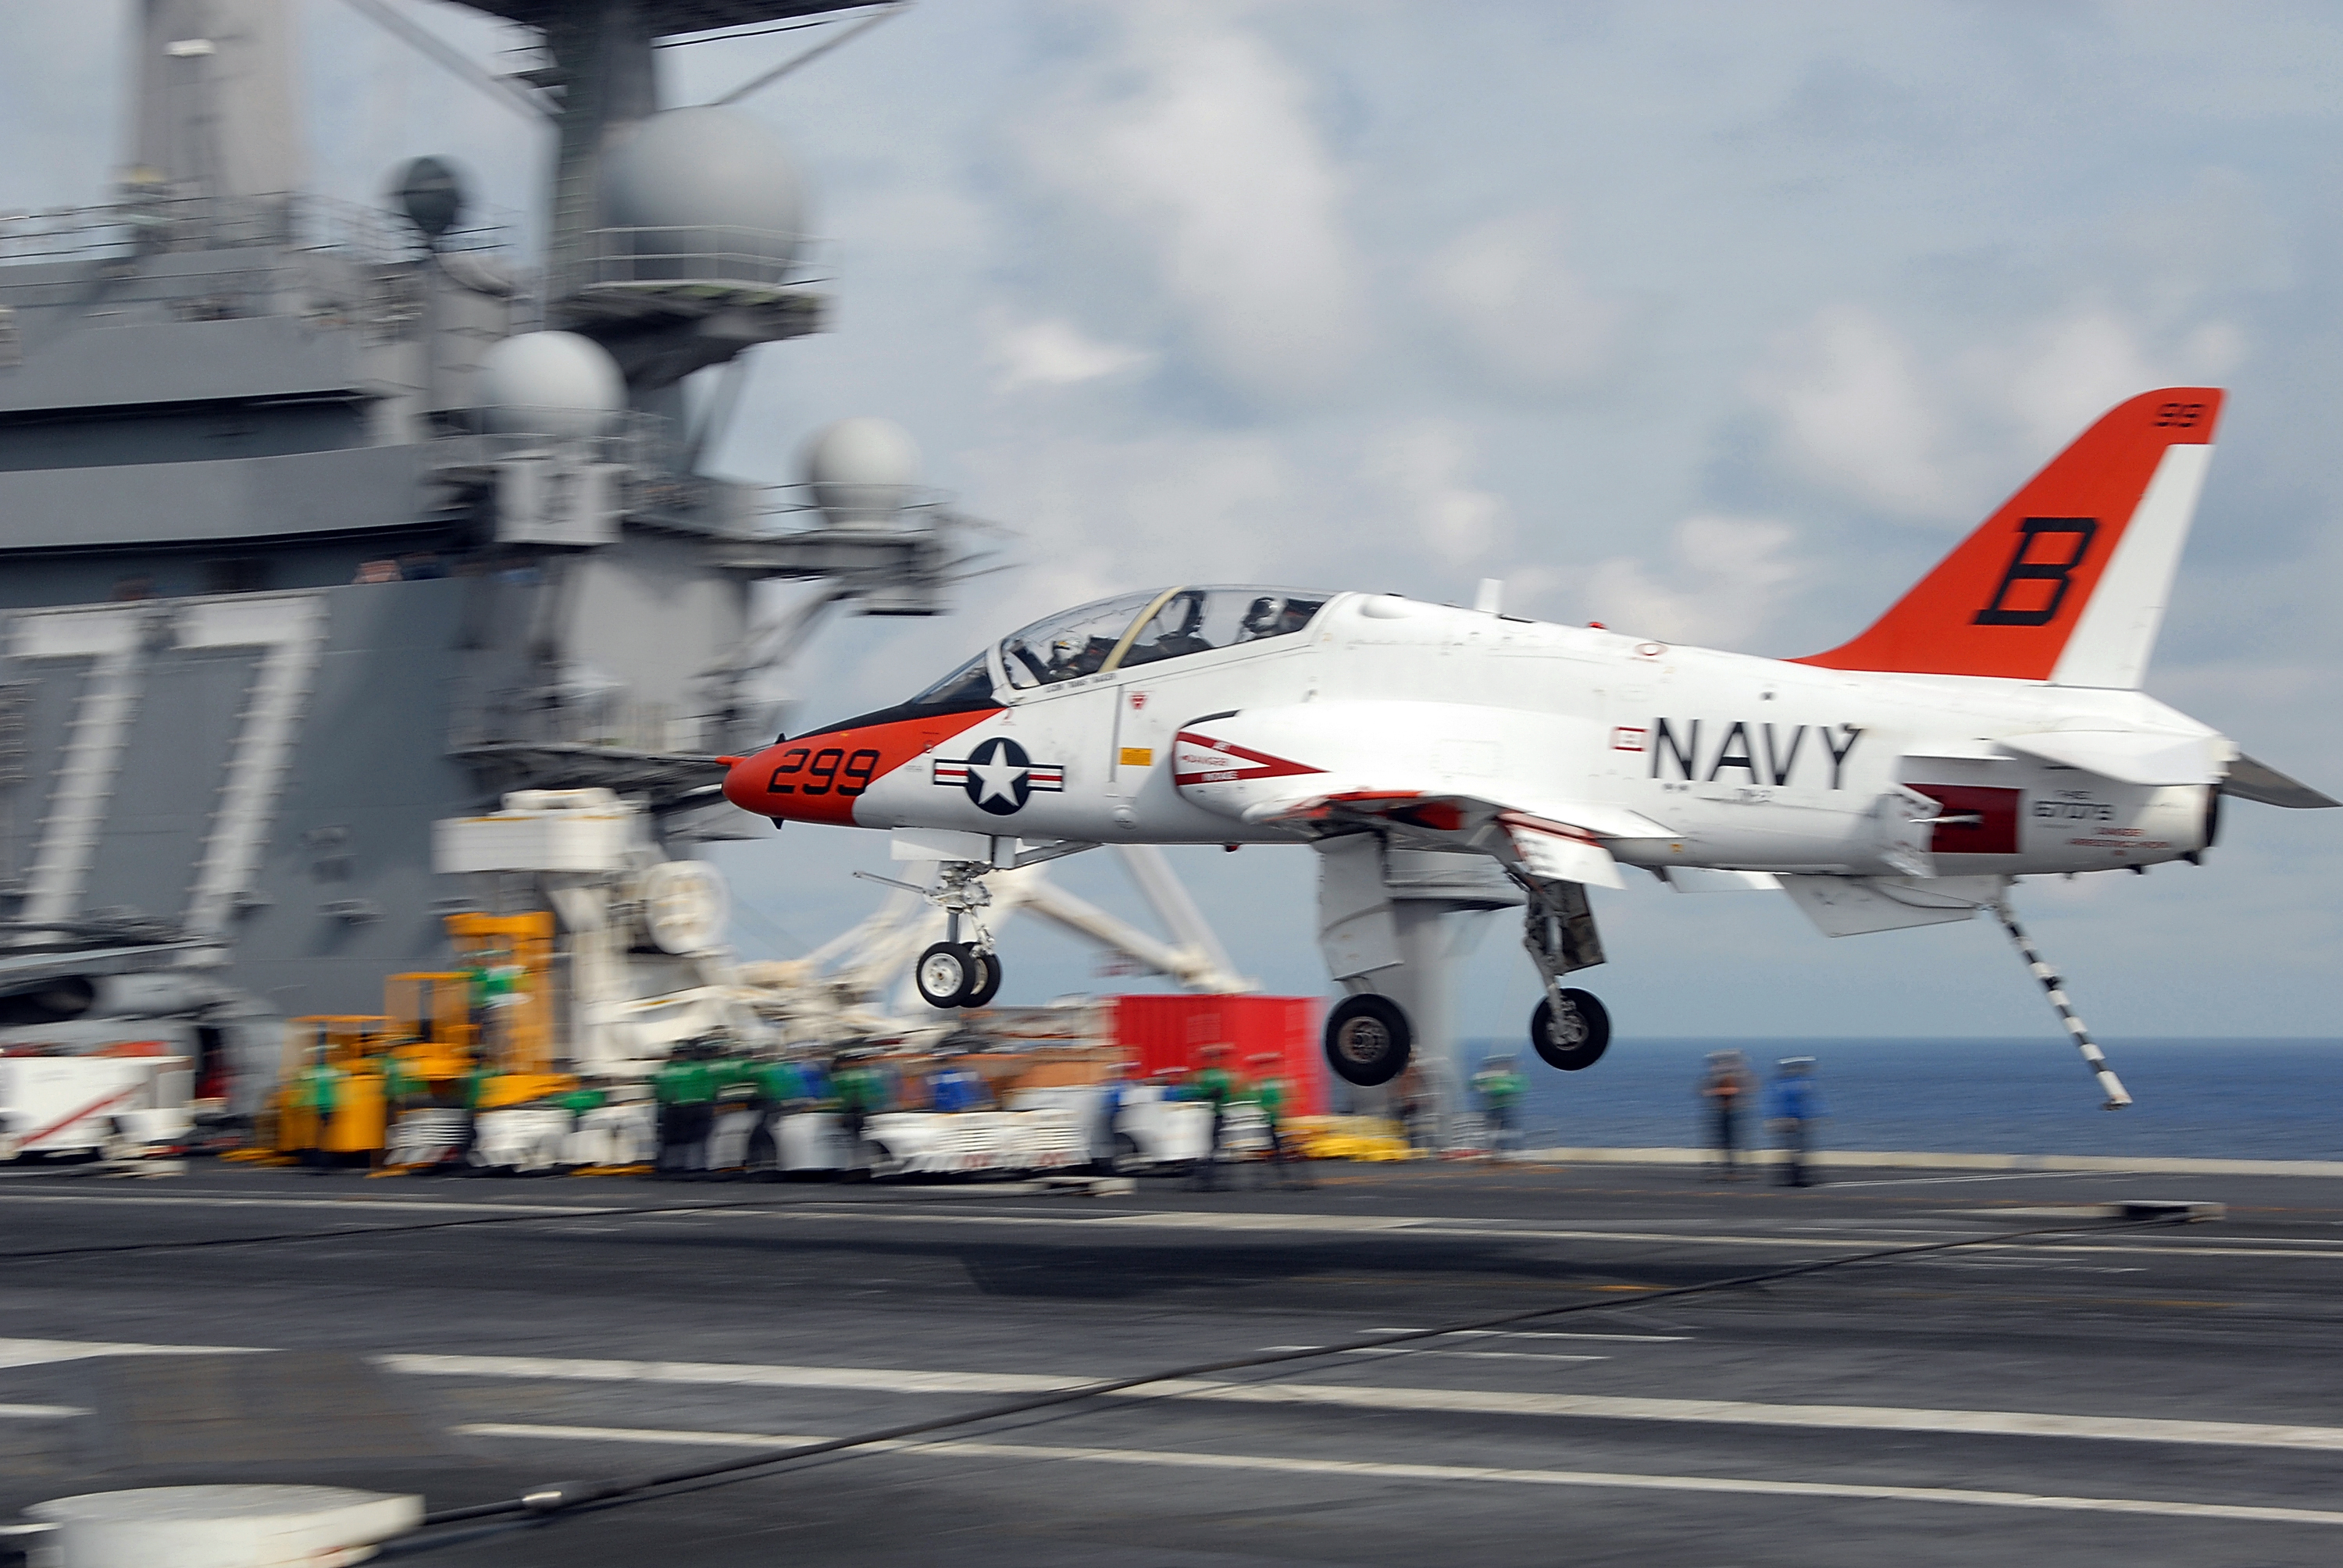 US Navy 090608-N-7656T-096 A T-45A Goshawk training aircraft assigned to Chief of Naval Air Training (CNATRA) comes in for an arrested landing or 